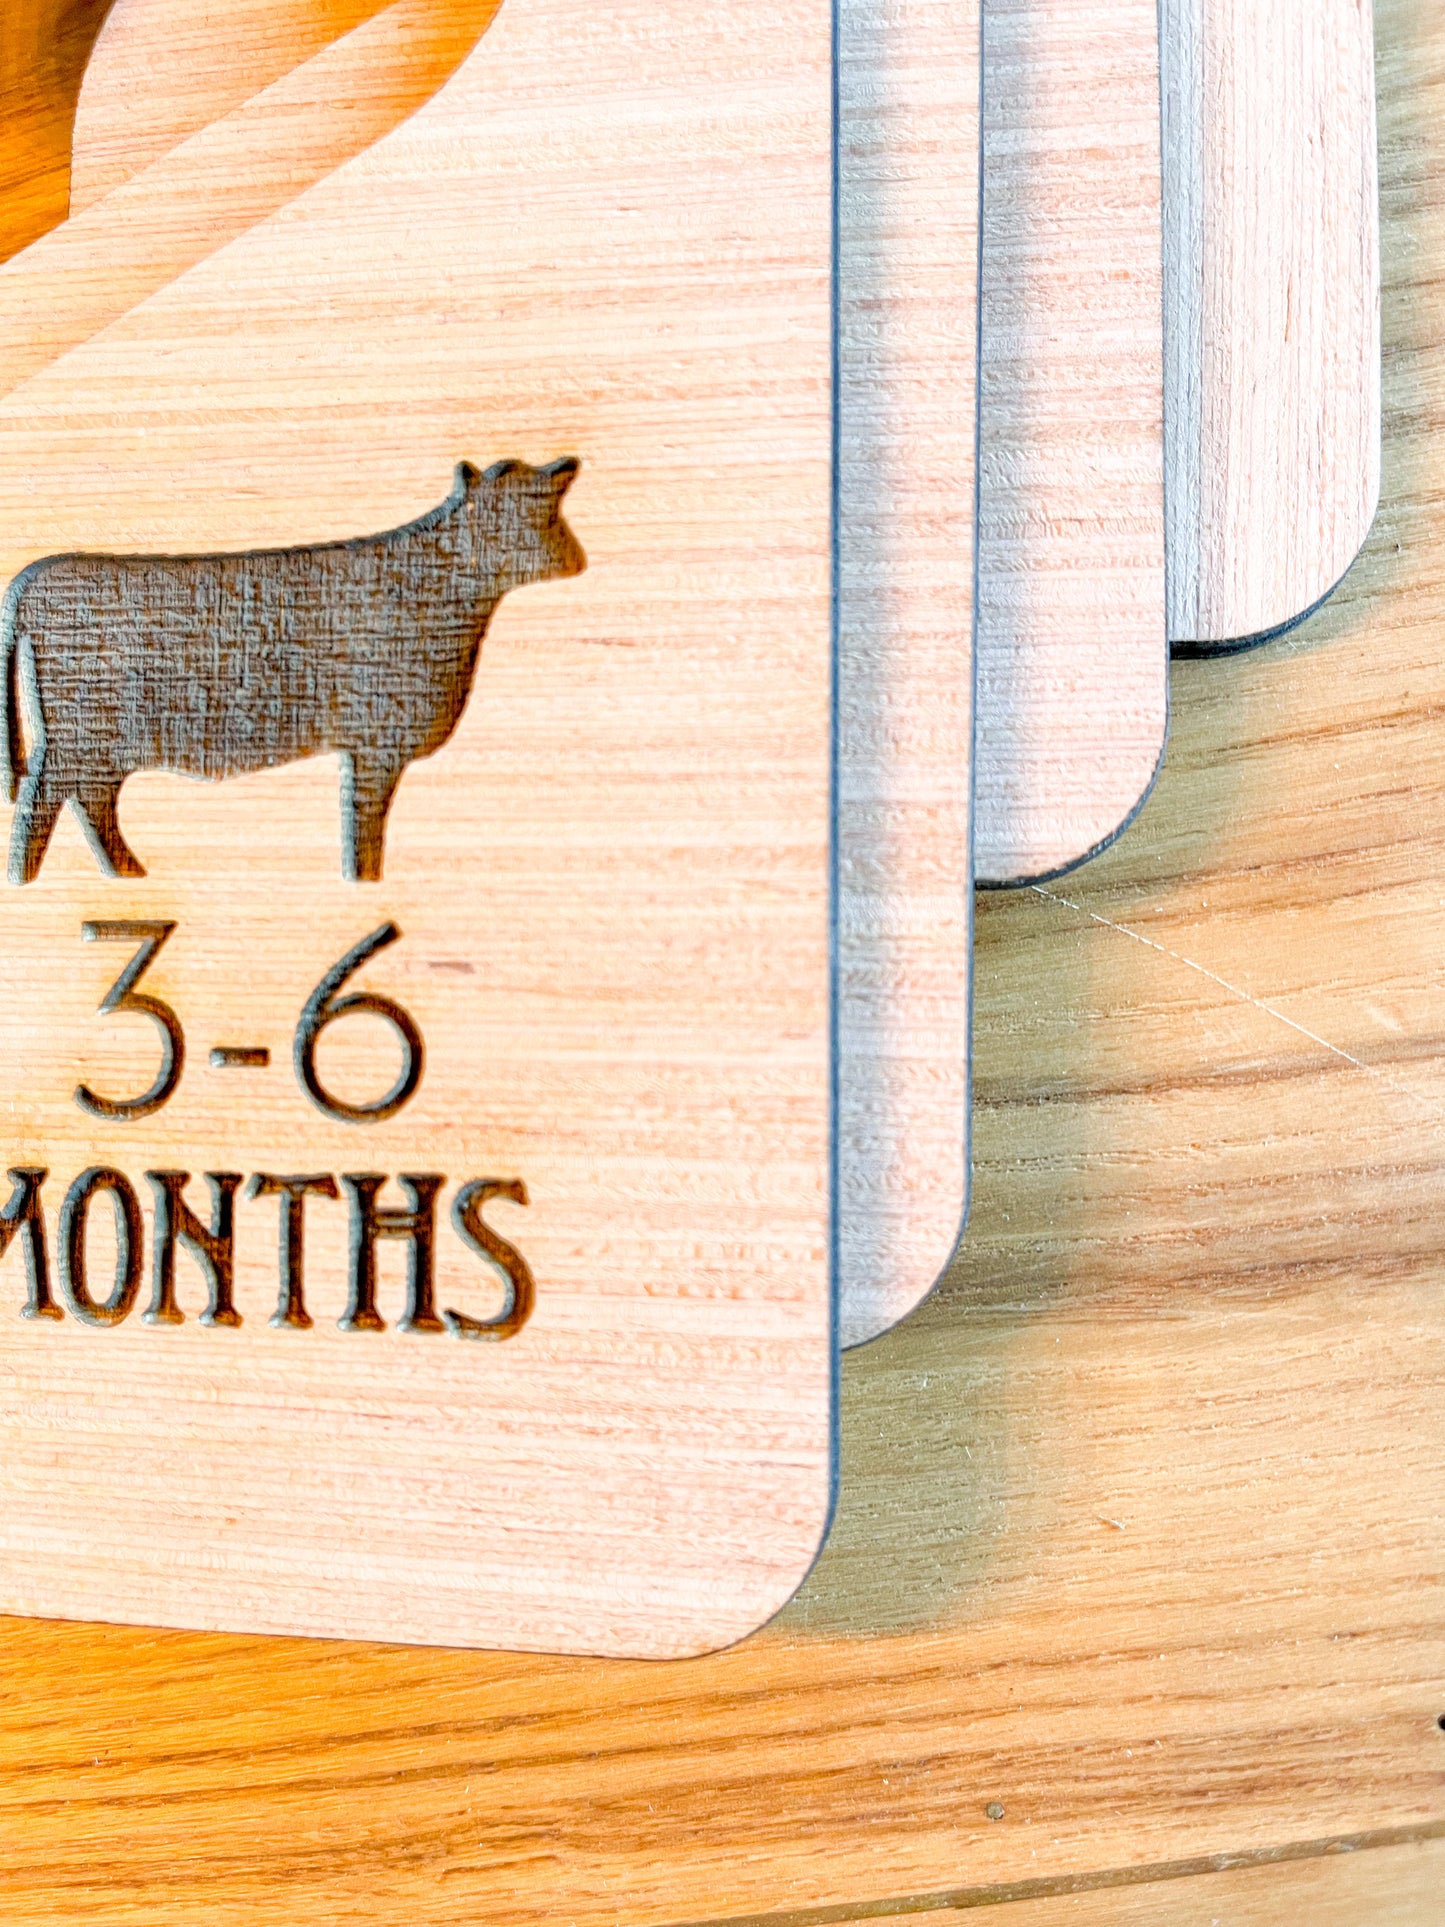 Cattle Ear Tag Baby laser engraved Milestone cards + closet hangers ; photo props; new born; babyshower gift Western Country